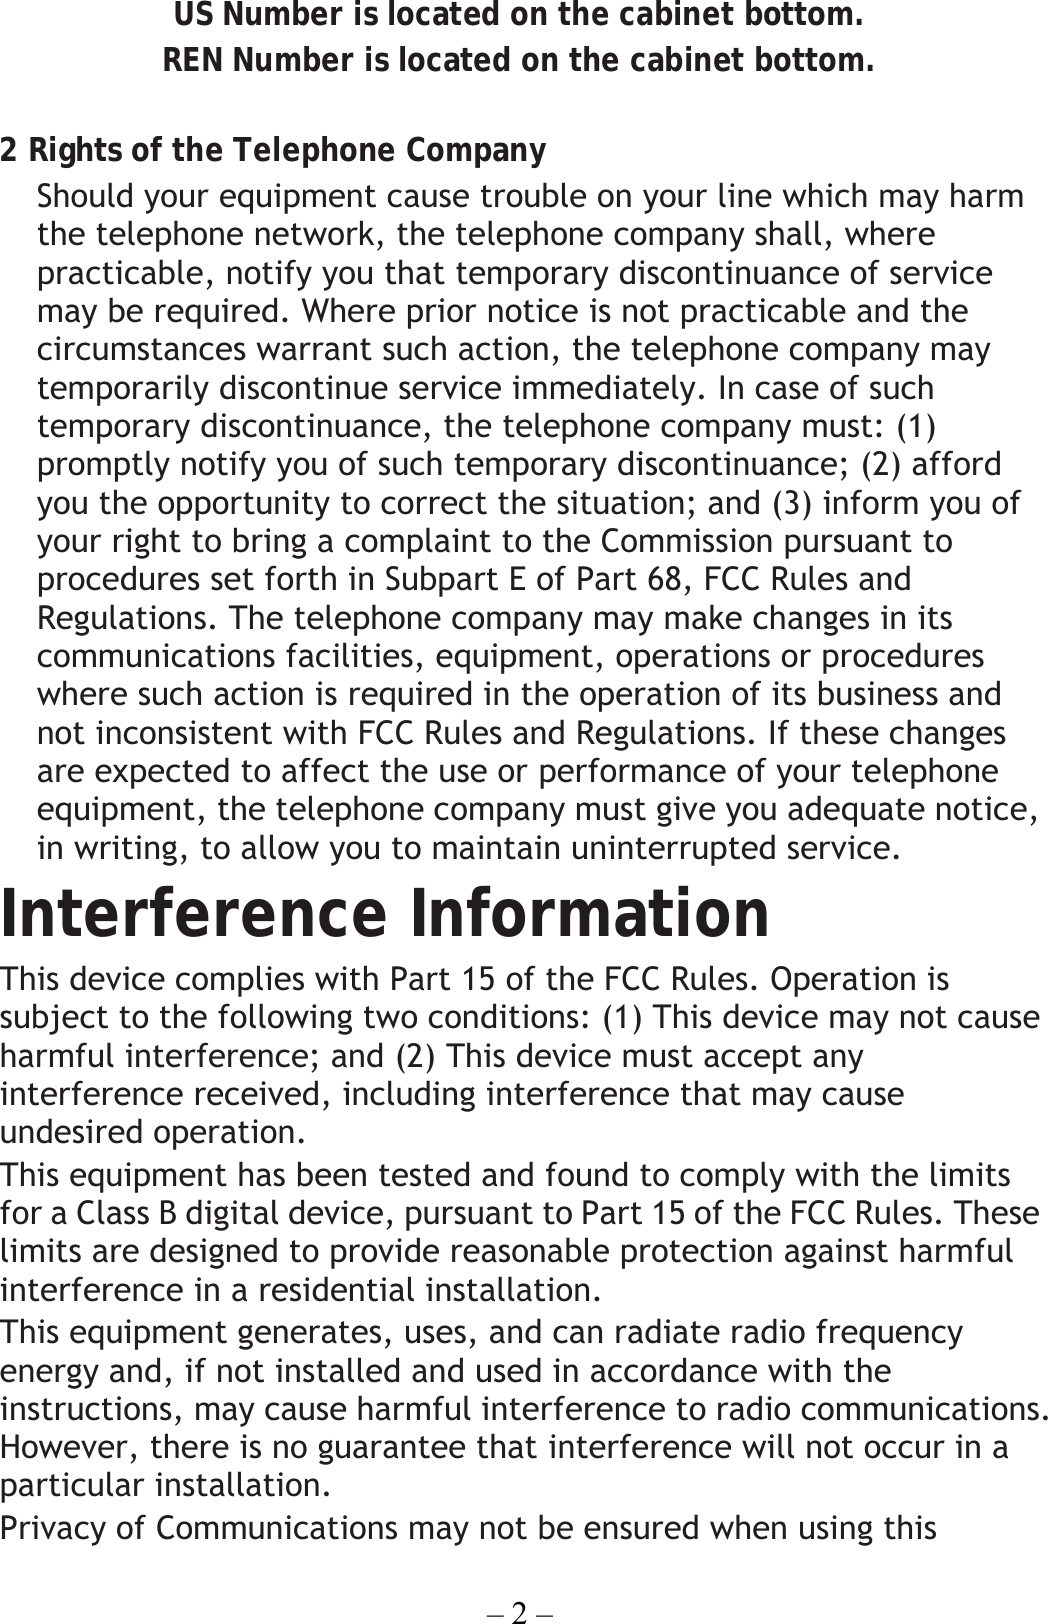 – 2 – US Number is located on the cabinet bottom. REN Number is located on the cabinet bottom.  2 Rights of the Telephone Company   Should your equipment cause trouble on your line which may harm the telephone network, the telephone company shall, where practicable, notify you that temporary discontinuance of service may be required. Where prior notice is not practicable and the circumstances warrant such action, the telephone company may temporarily discontinue service immediately. In case of such temporary discontinuance, the telephone company must: (1) promptly notify you of such temporary discontinuance; (2) afford you the opportunity to correct the situation; and (3) inform you of your right to bring a complaint to the Commission pursuant to procedures set forth in Subpart E of Part 68, FCC Rules and Regulations. The telephone company may make changes in its communications facilities, equipment, operations or procedures where such action is required in the operation of its business and not inconsistent with FCC Rules and Regulations. If these changes are expected to affect the use or performance of your telephone equipment, the telephone company must give you adequate notice, in writing, to allow you to maintain uninterrupted service. Interference Information This device complies with Part 15 of the FCC Rules. Operation is subject to the following two conditions: (1) This device may not cause harmful interference; and (2) This device must accept any interference received, including interference that may cause undesired operation. This equipment has been tested and found to comply with the limits for a Class B digital device, pursuant to Part 15 of the FCC Rules. These limits are designed to provide reasonable protection against harmful interference in a residential installation. This equipment generates, uses, and can radiate radio frequency energy and, if not installed and used in accordance with the instructions, may cause harmful interference to radio communications. However, there is no guarantee that interference will not occur in a particular installation. Privacy of Communications may not be ensured when using this 